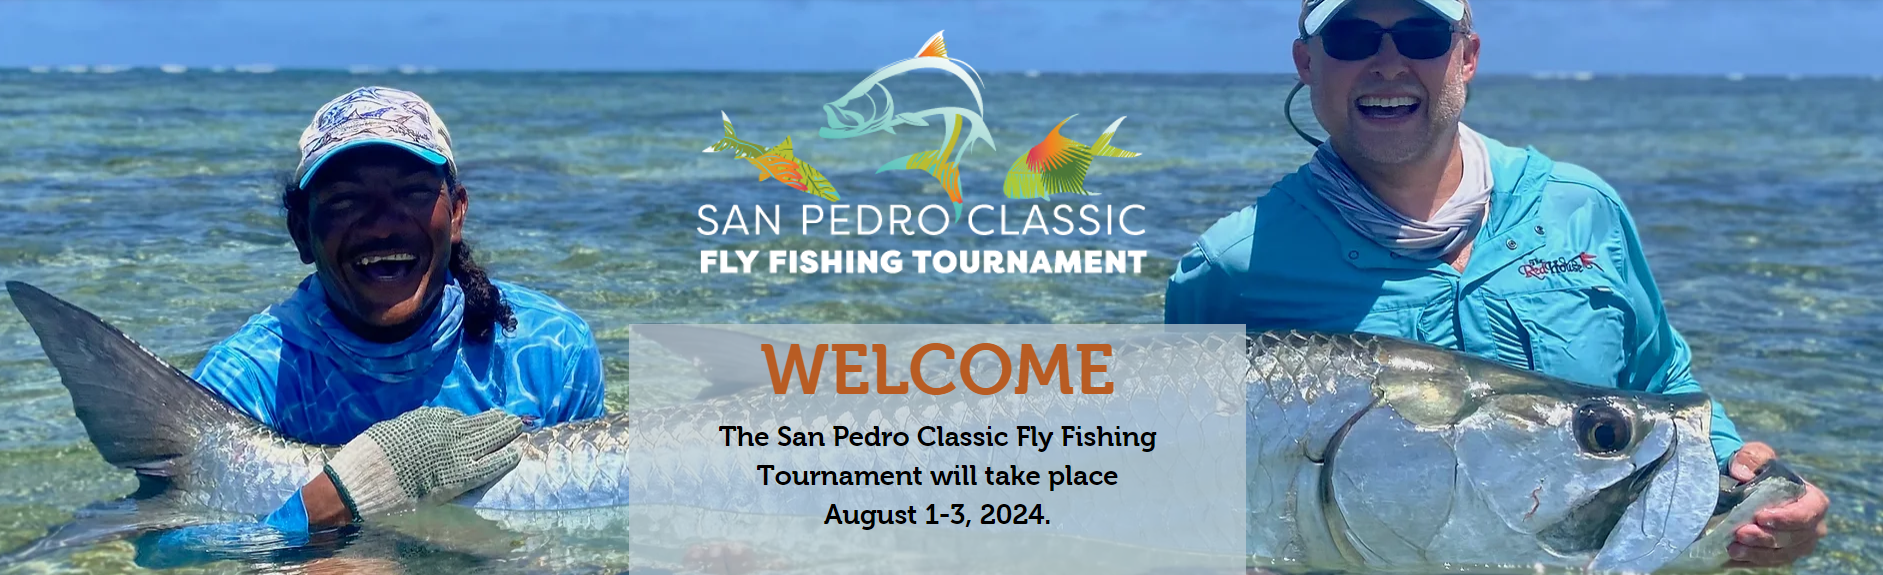 Fly Fishing Tournament